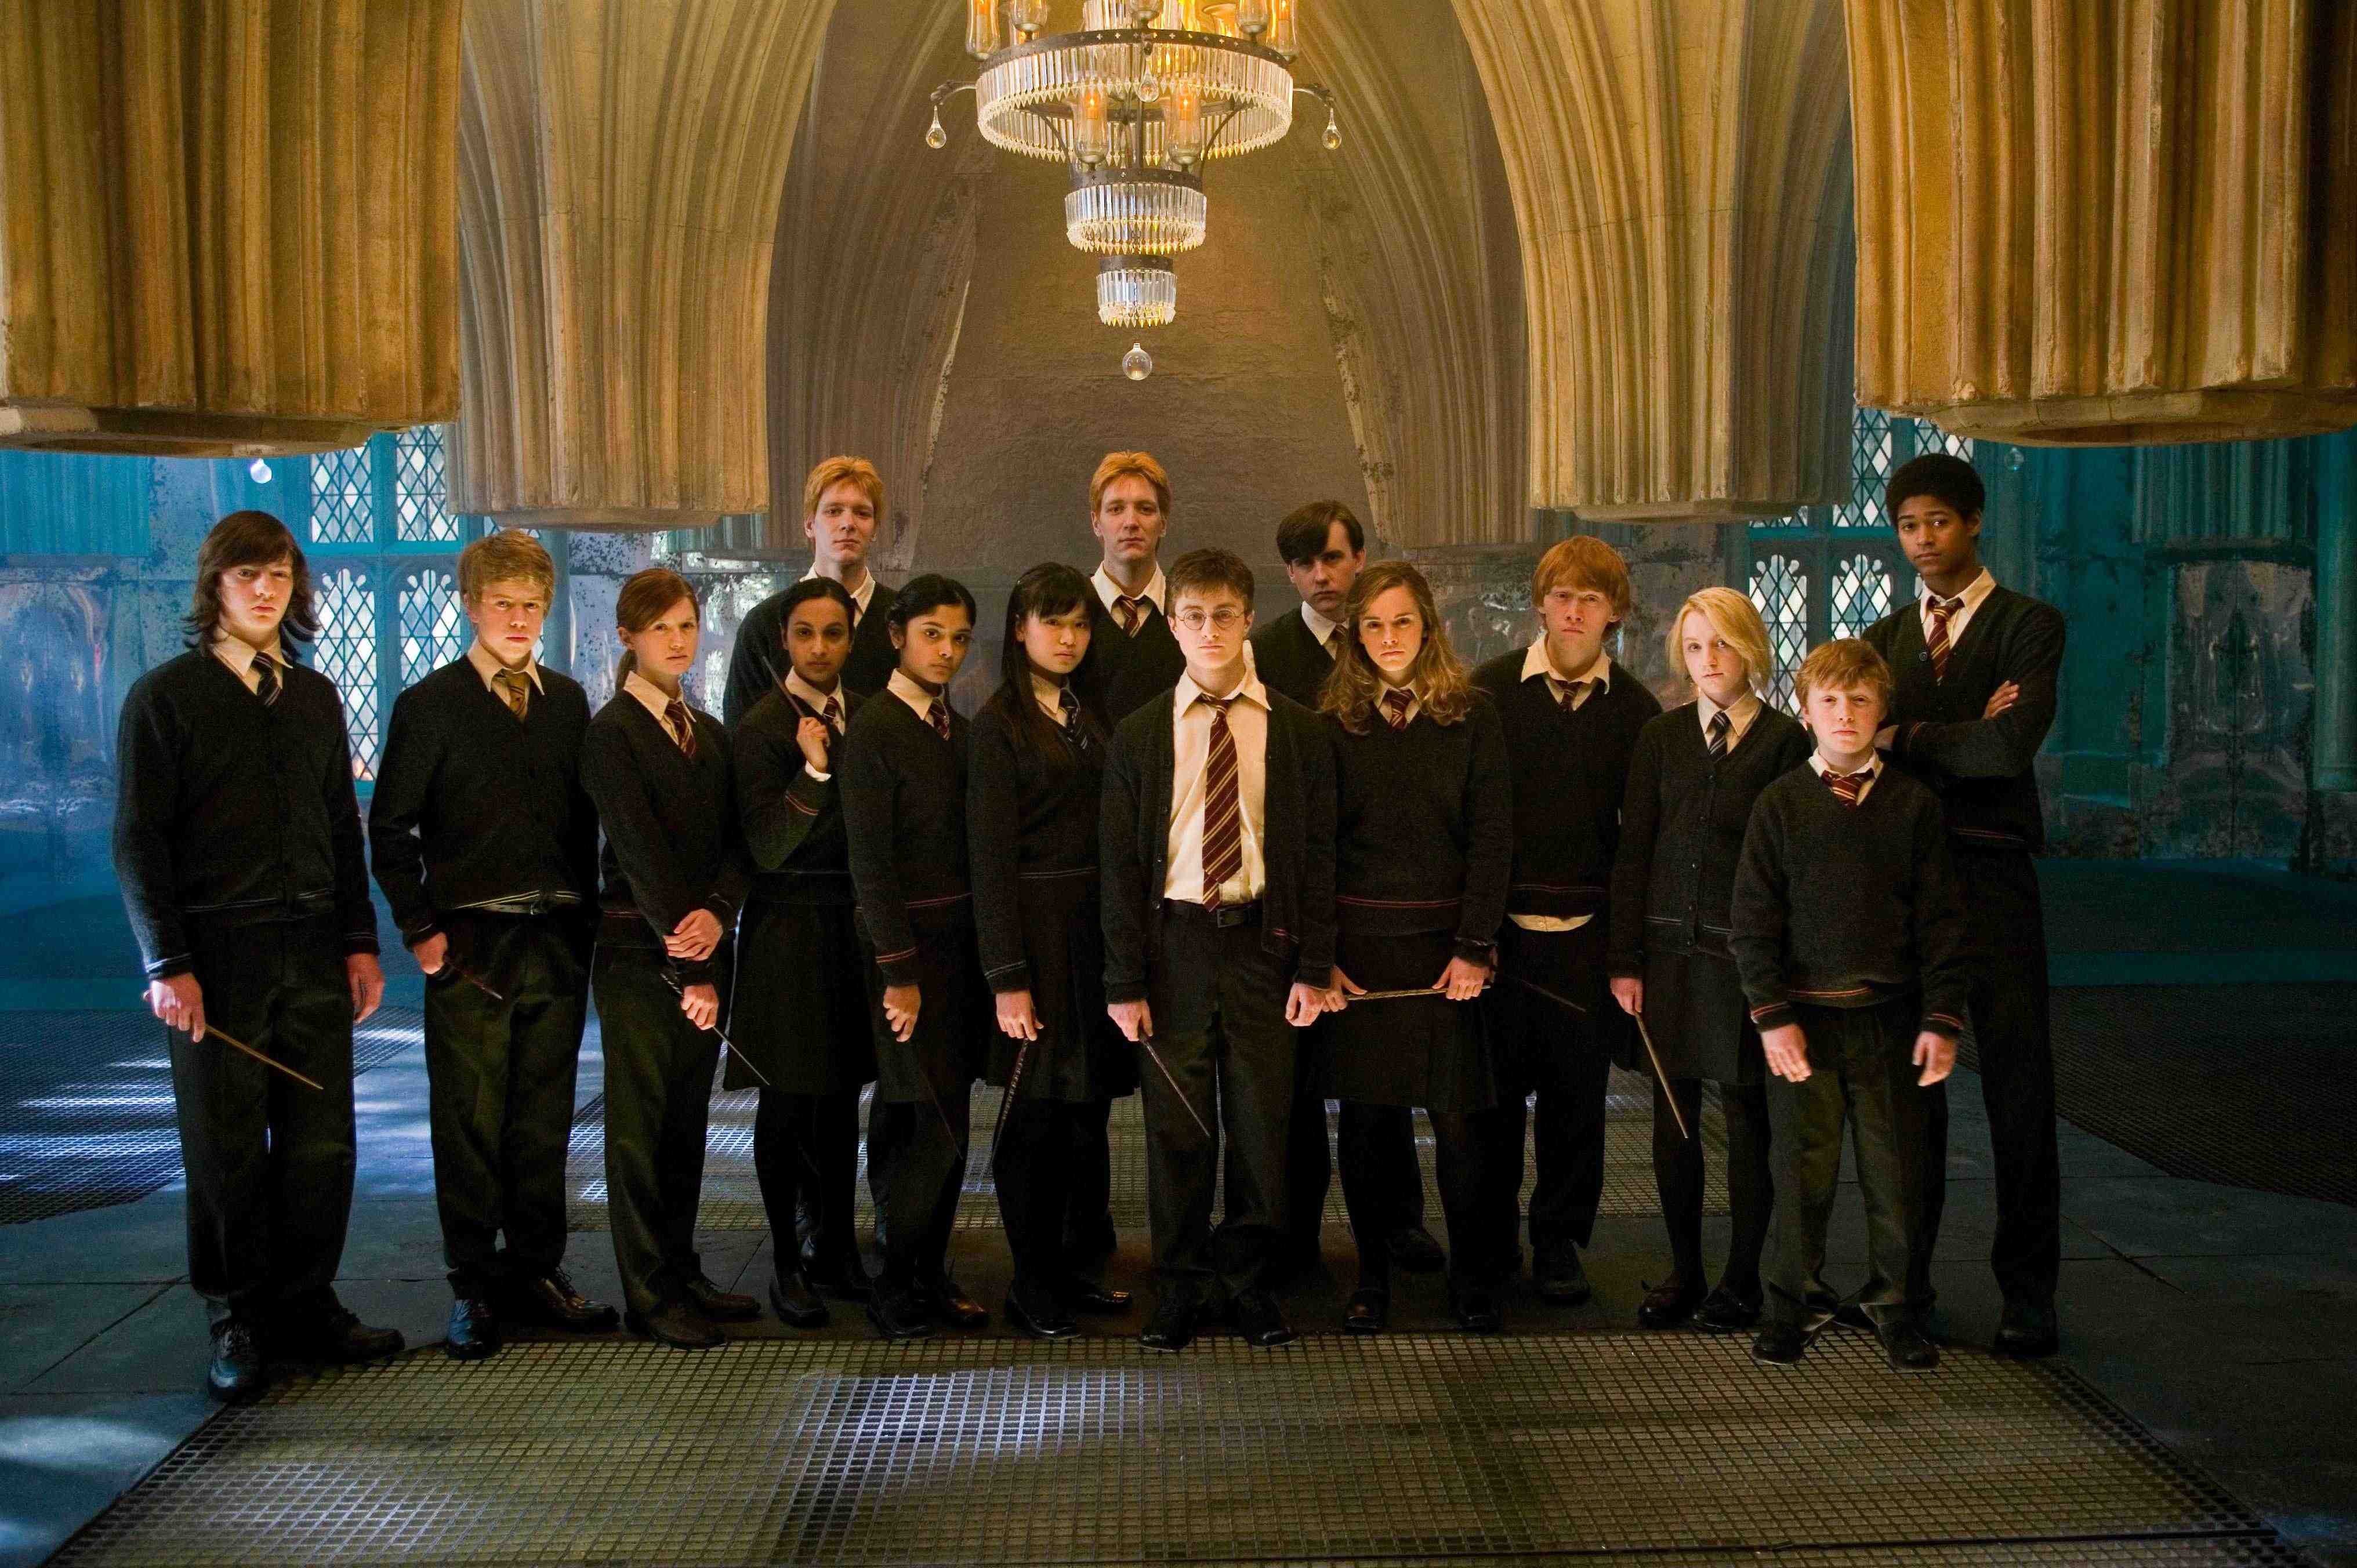 Harry Potter- an instance of LMX theory of leadership 